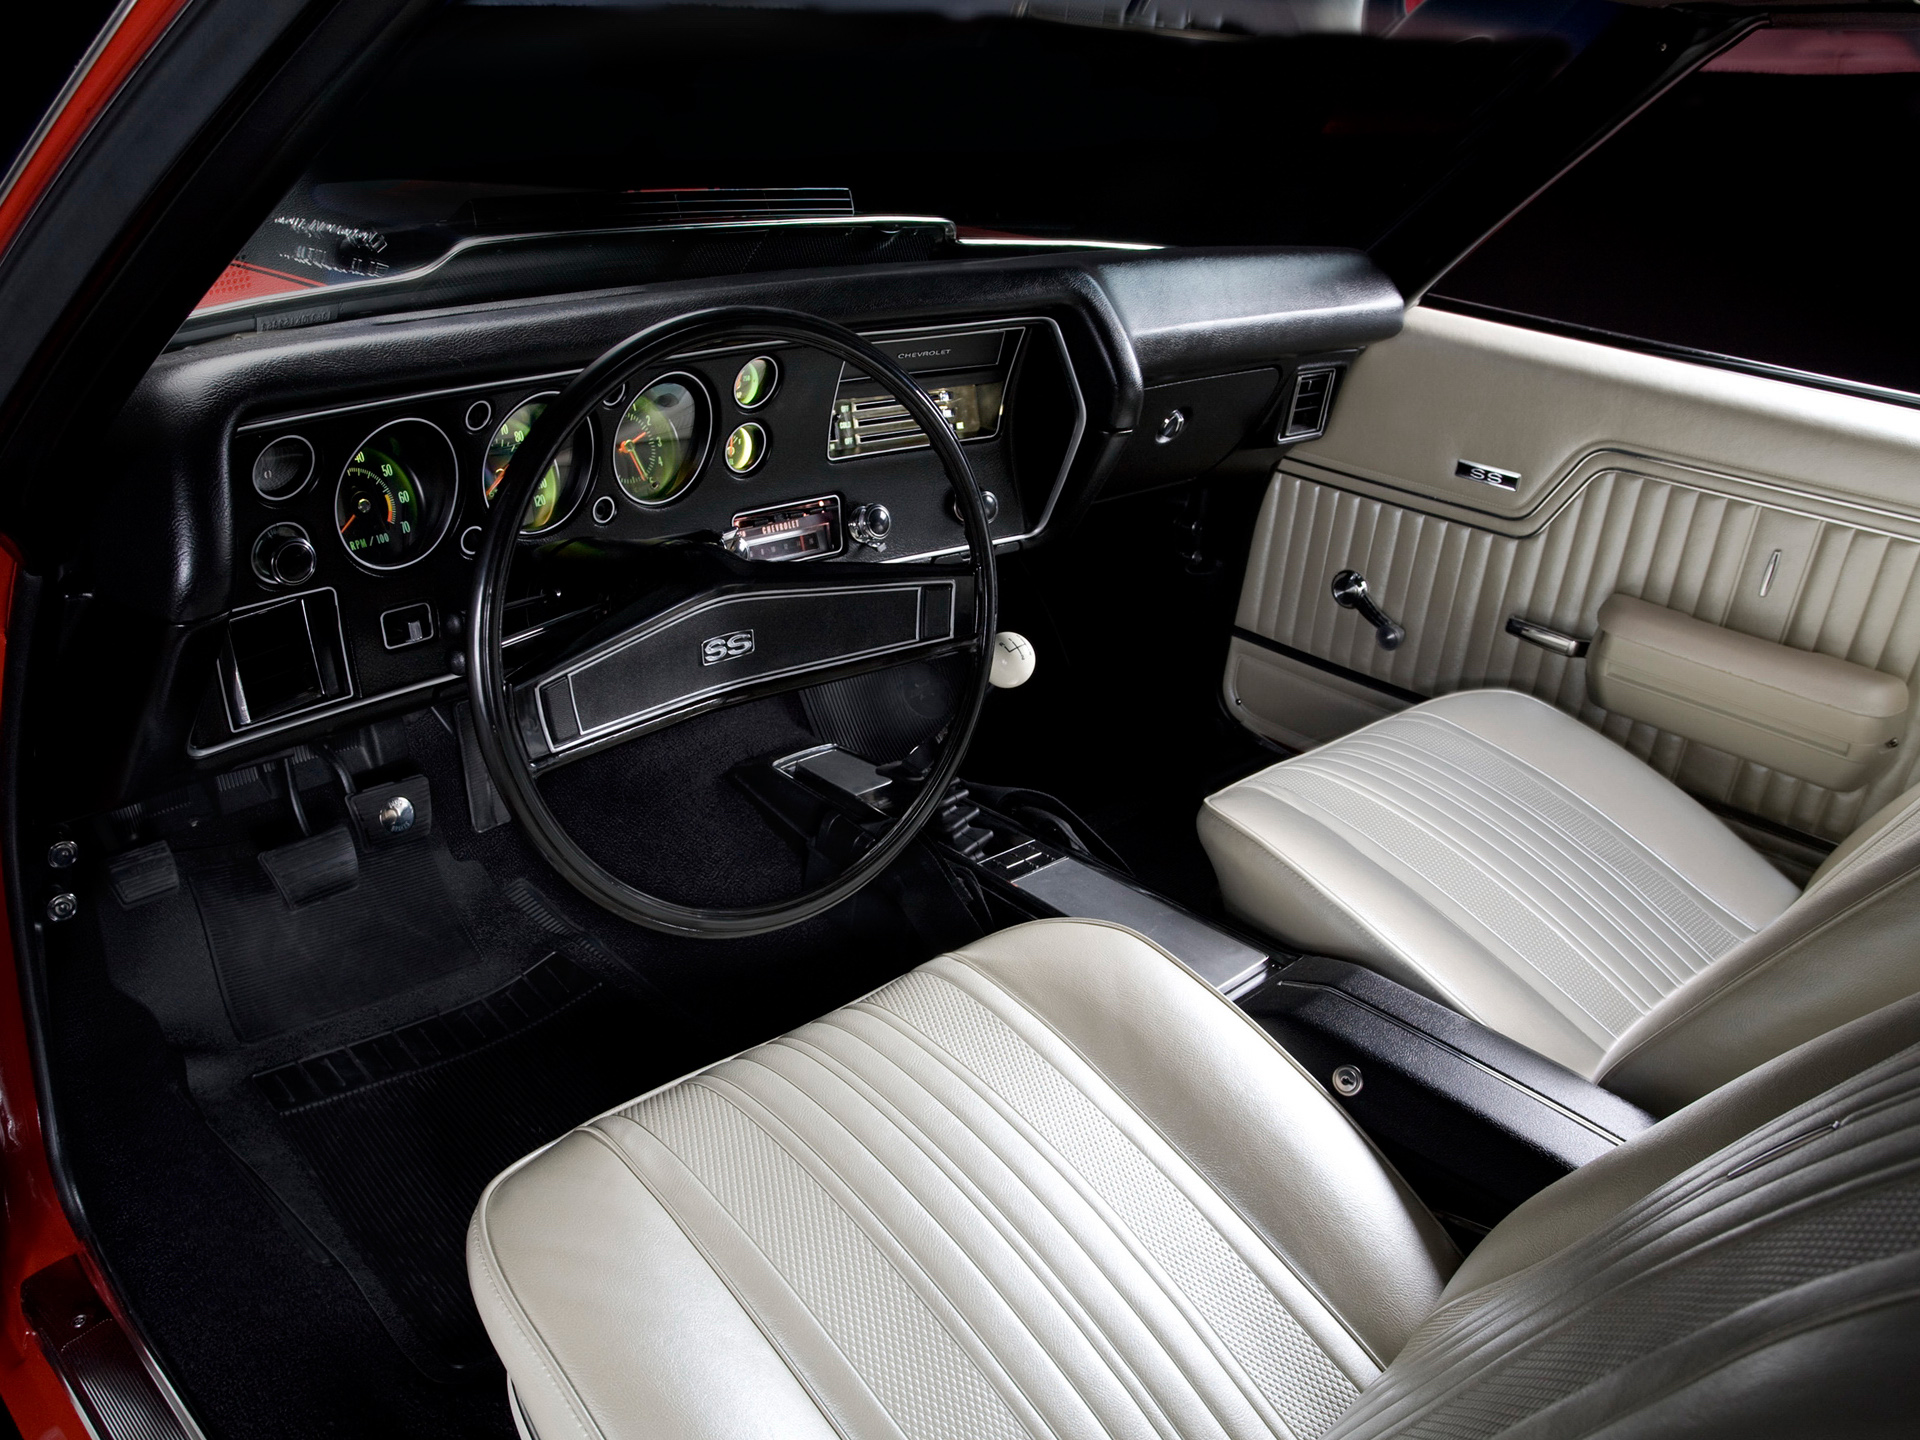 1970, Chevrolet, Chevelle, Ss, 454, Ls6, Hardtop, Coupe, Muscle, Classic, S s, Interior Wallpaper